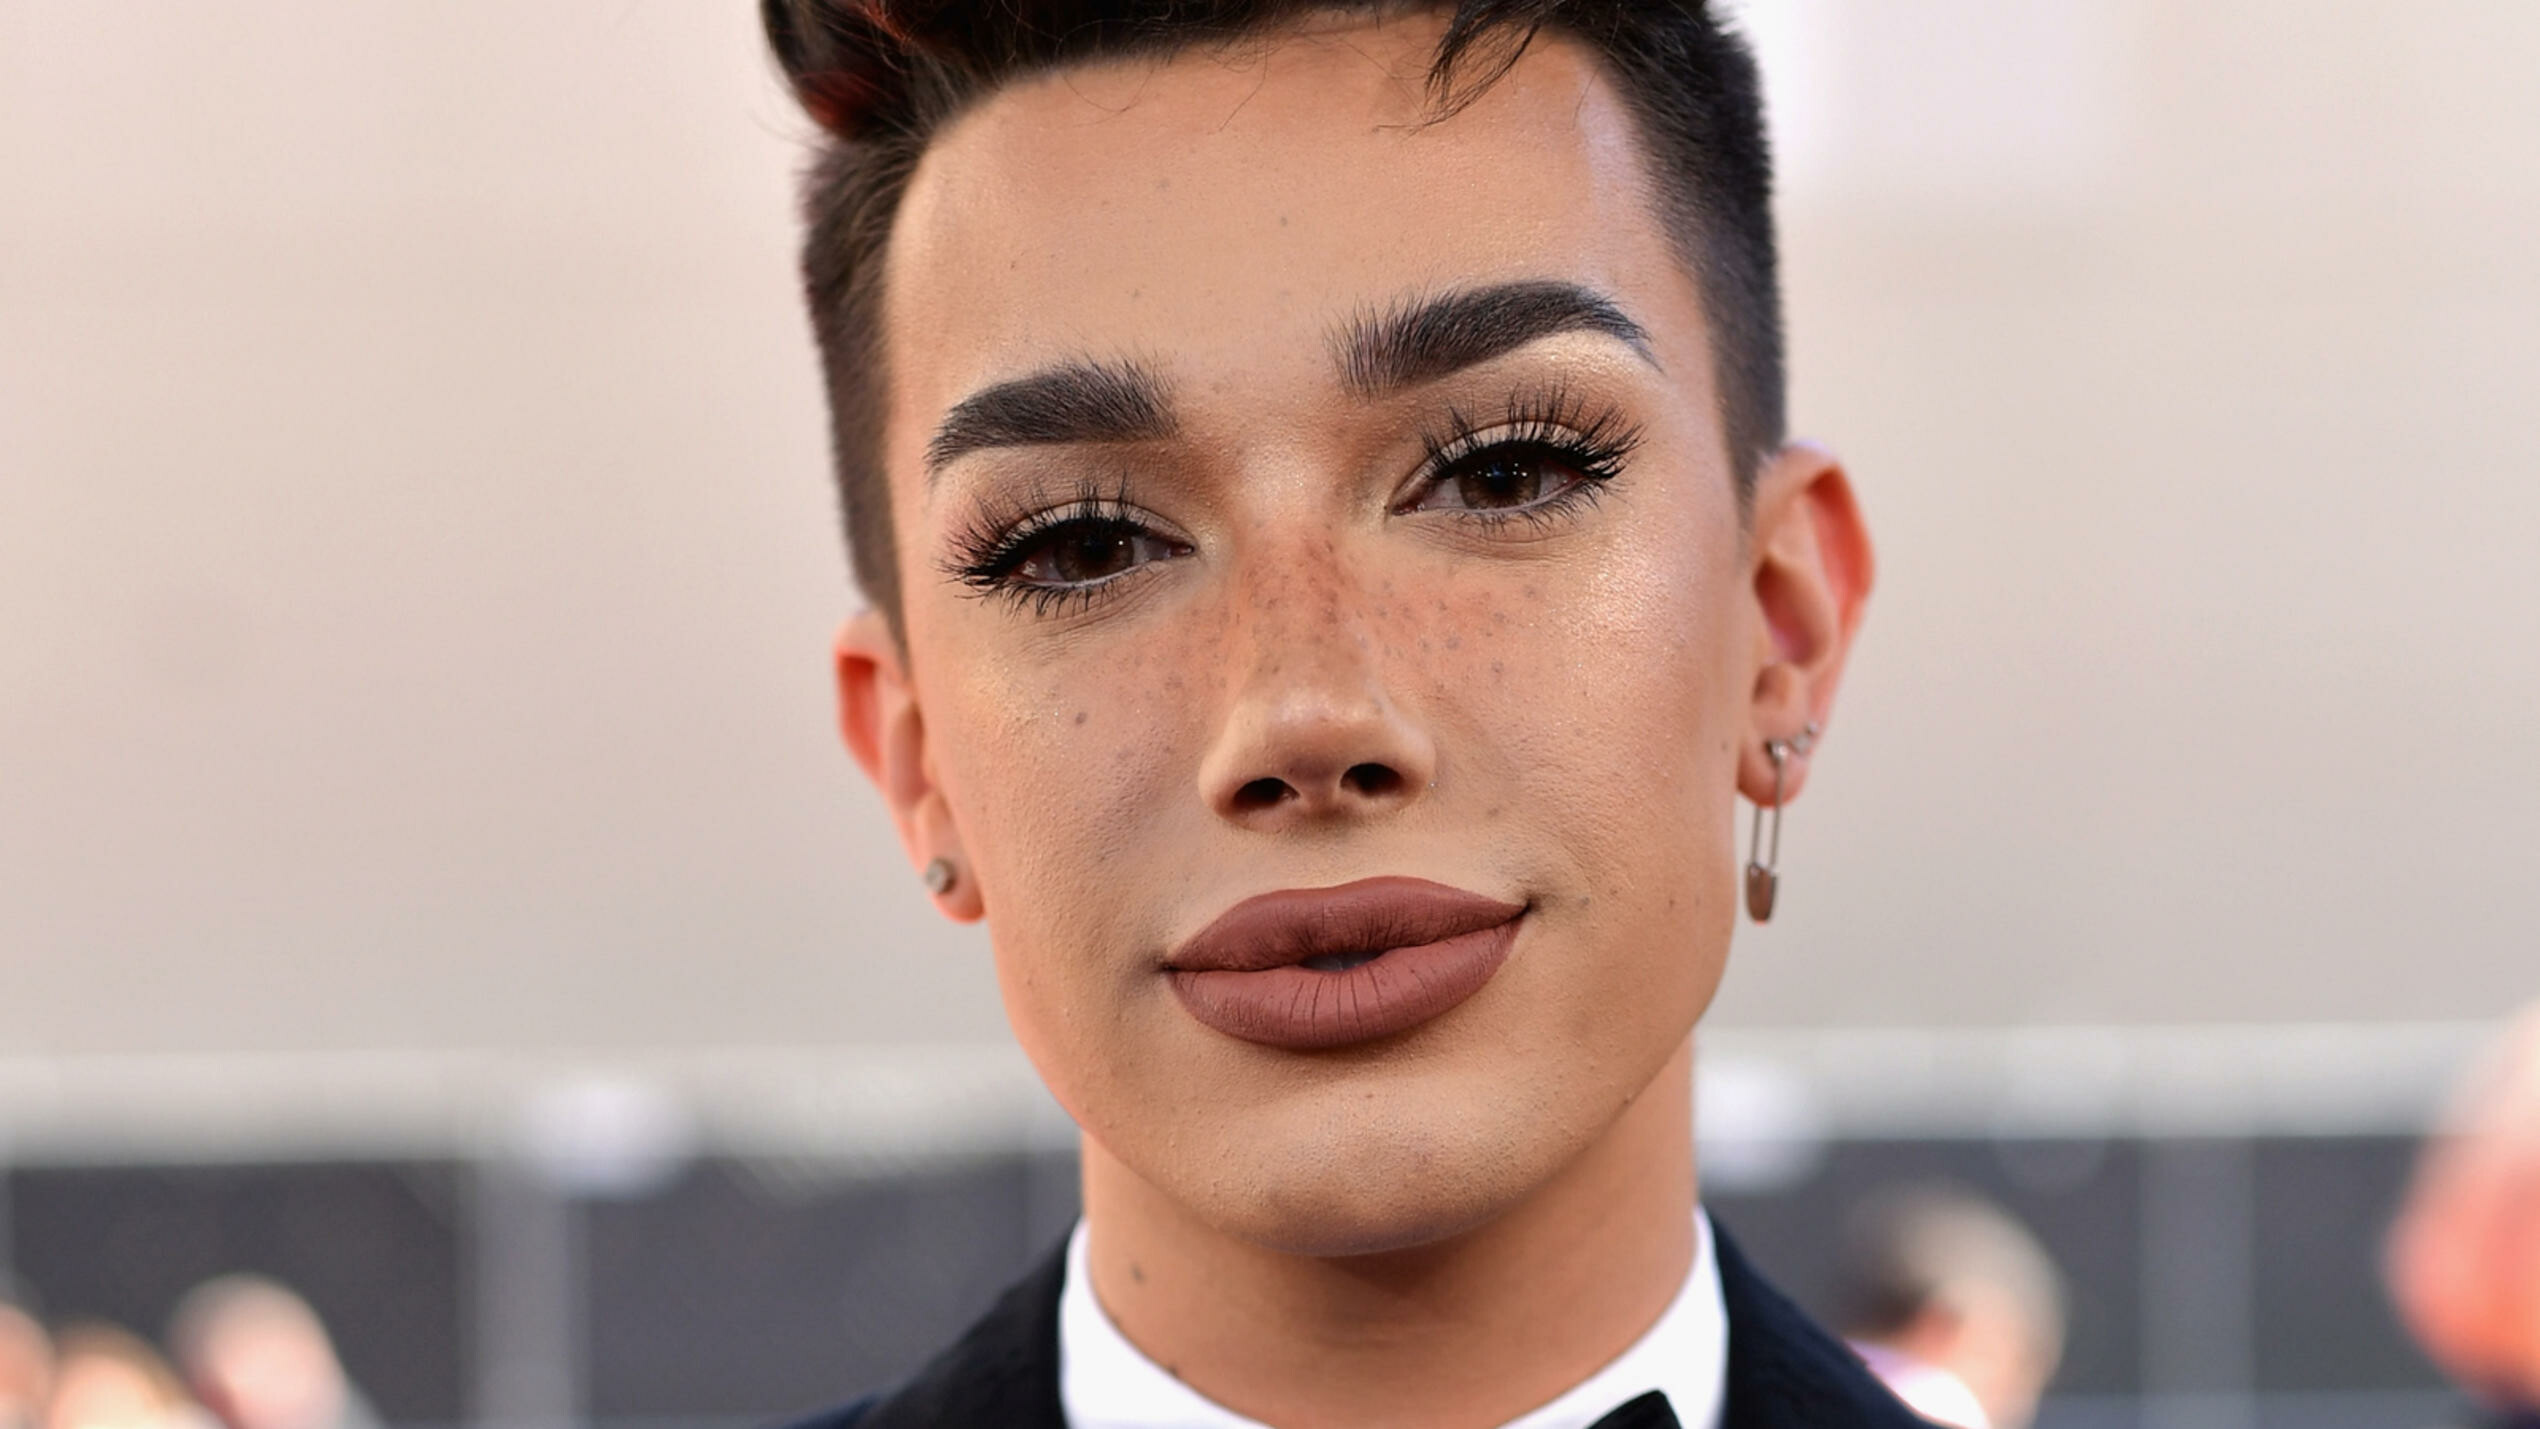 James Charles, Follower loss, YouTube scandal, Sexual allegations, 2540x1430 HD Desktop